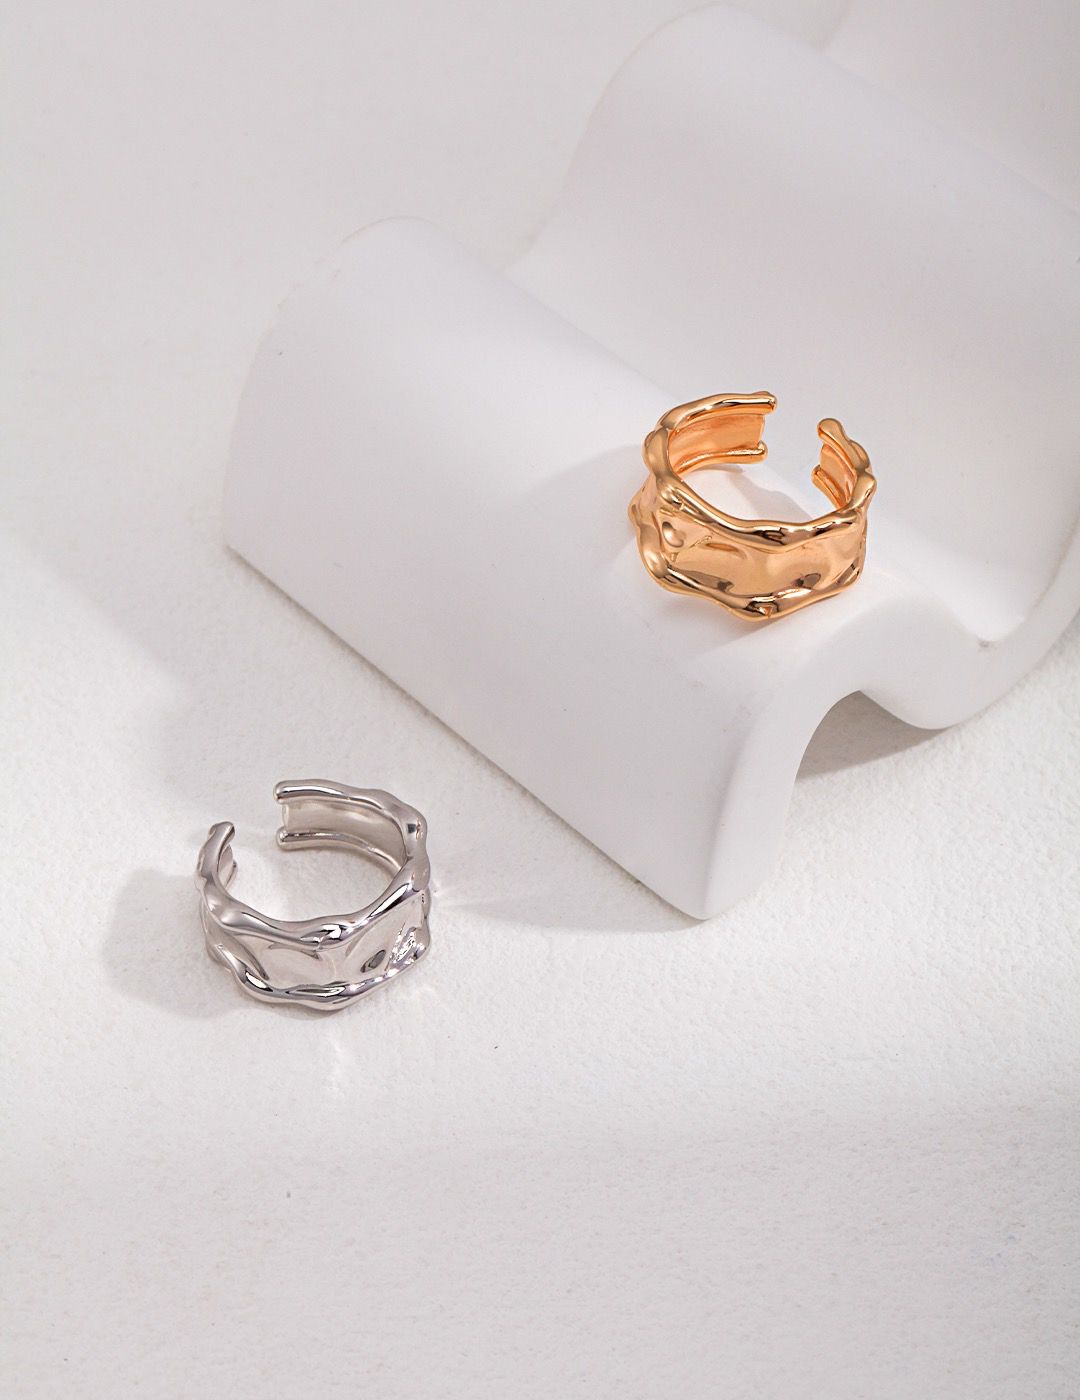 Minimalist Chunky Bands - Sleek, contemporary rings in various sizes and finishes.